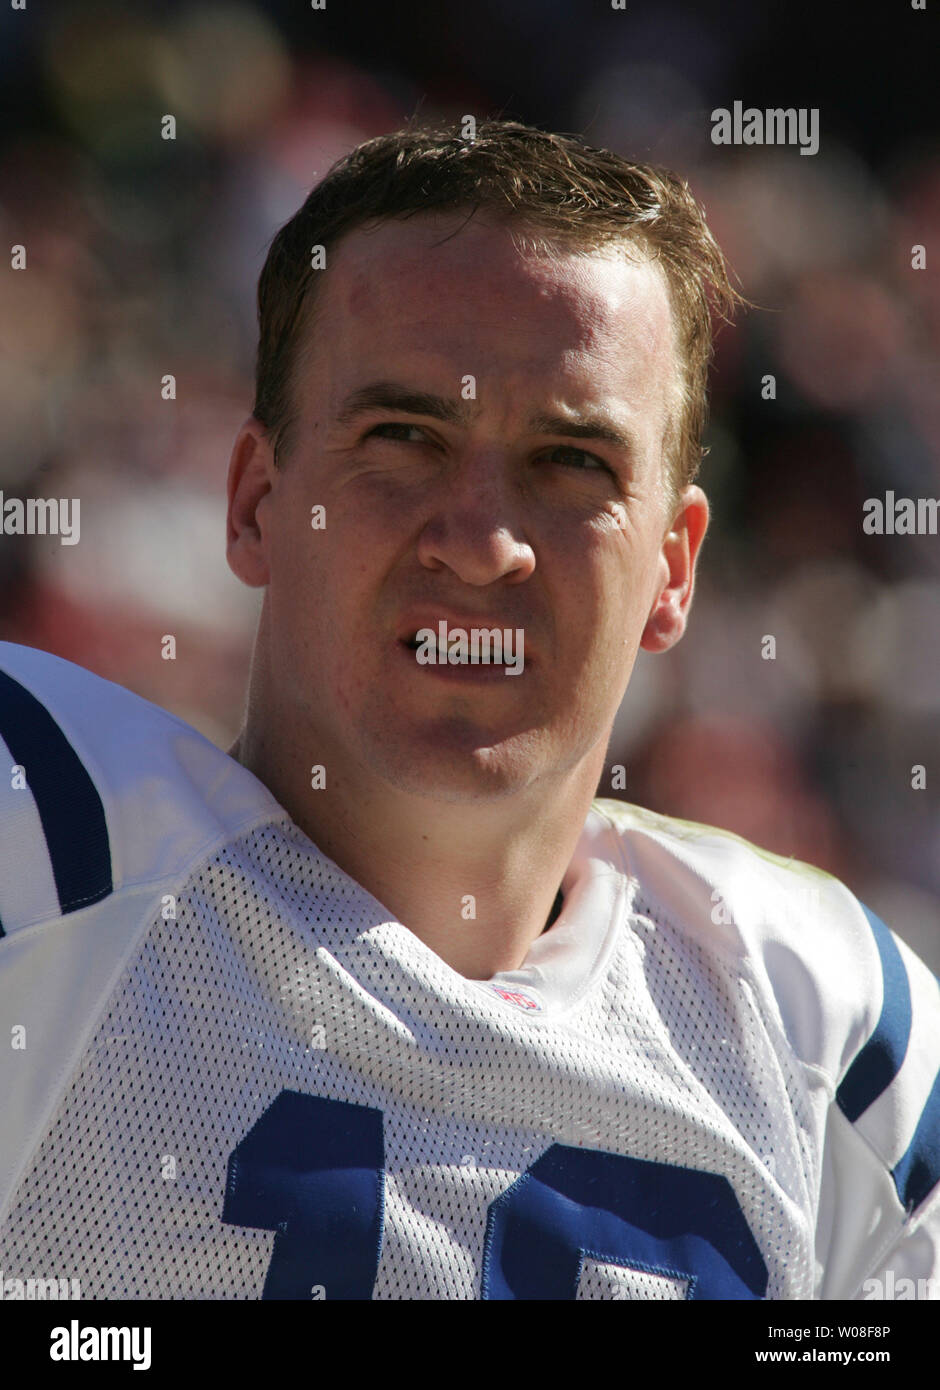 Indianapolis Colts QB Peyton Manning waits for the defense to get the ball during play against the San Francisco 49ers at Monster Park in San Francisco on October 9, 2005.  (UPI Photo/Terry Schmitt) Stock Photo